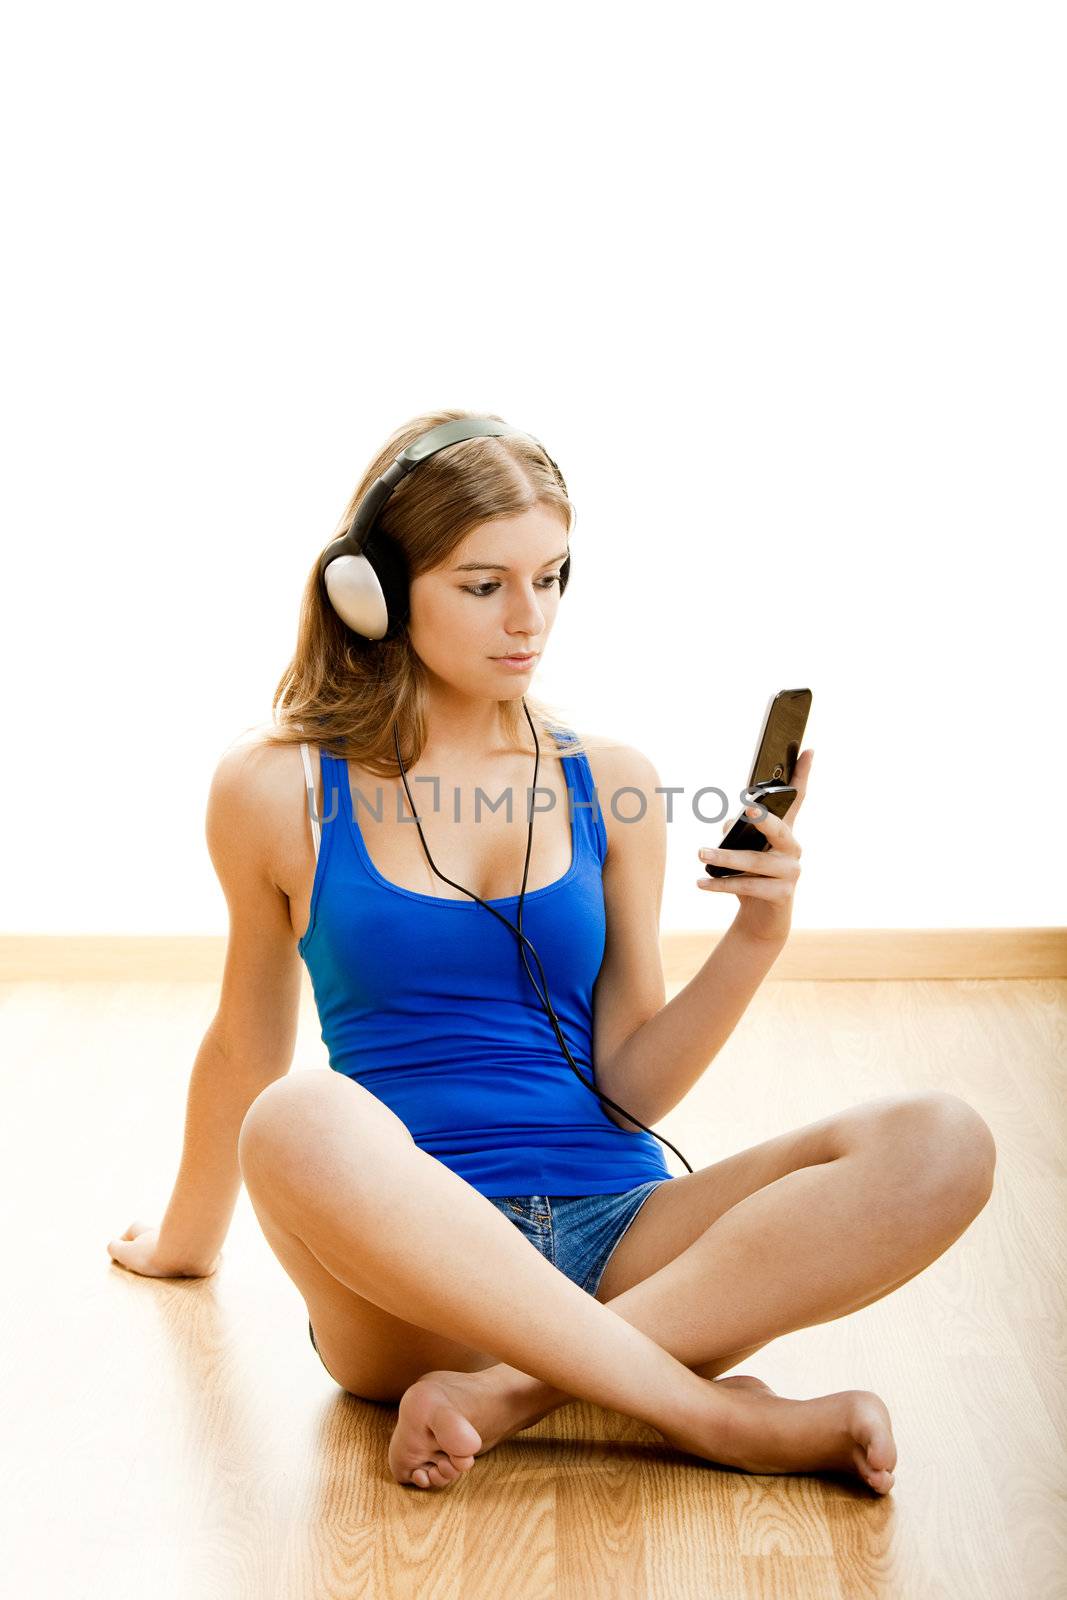 Beautiful young woman sitting on floor with headphones and holding a celphone